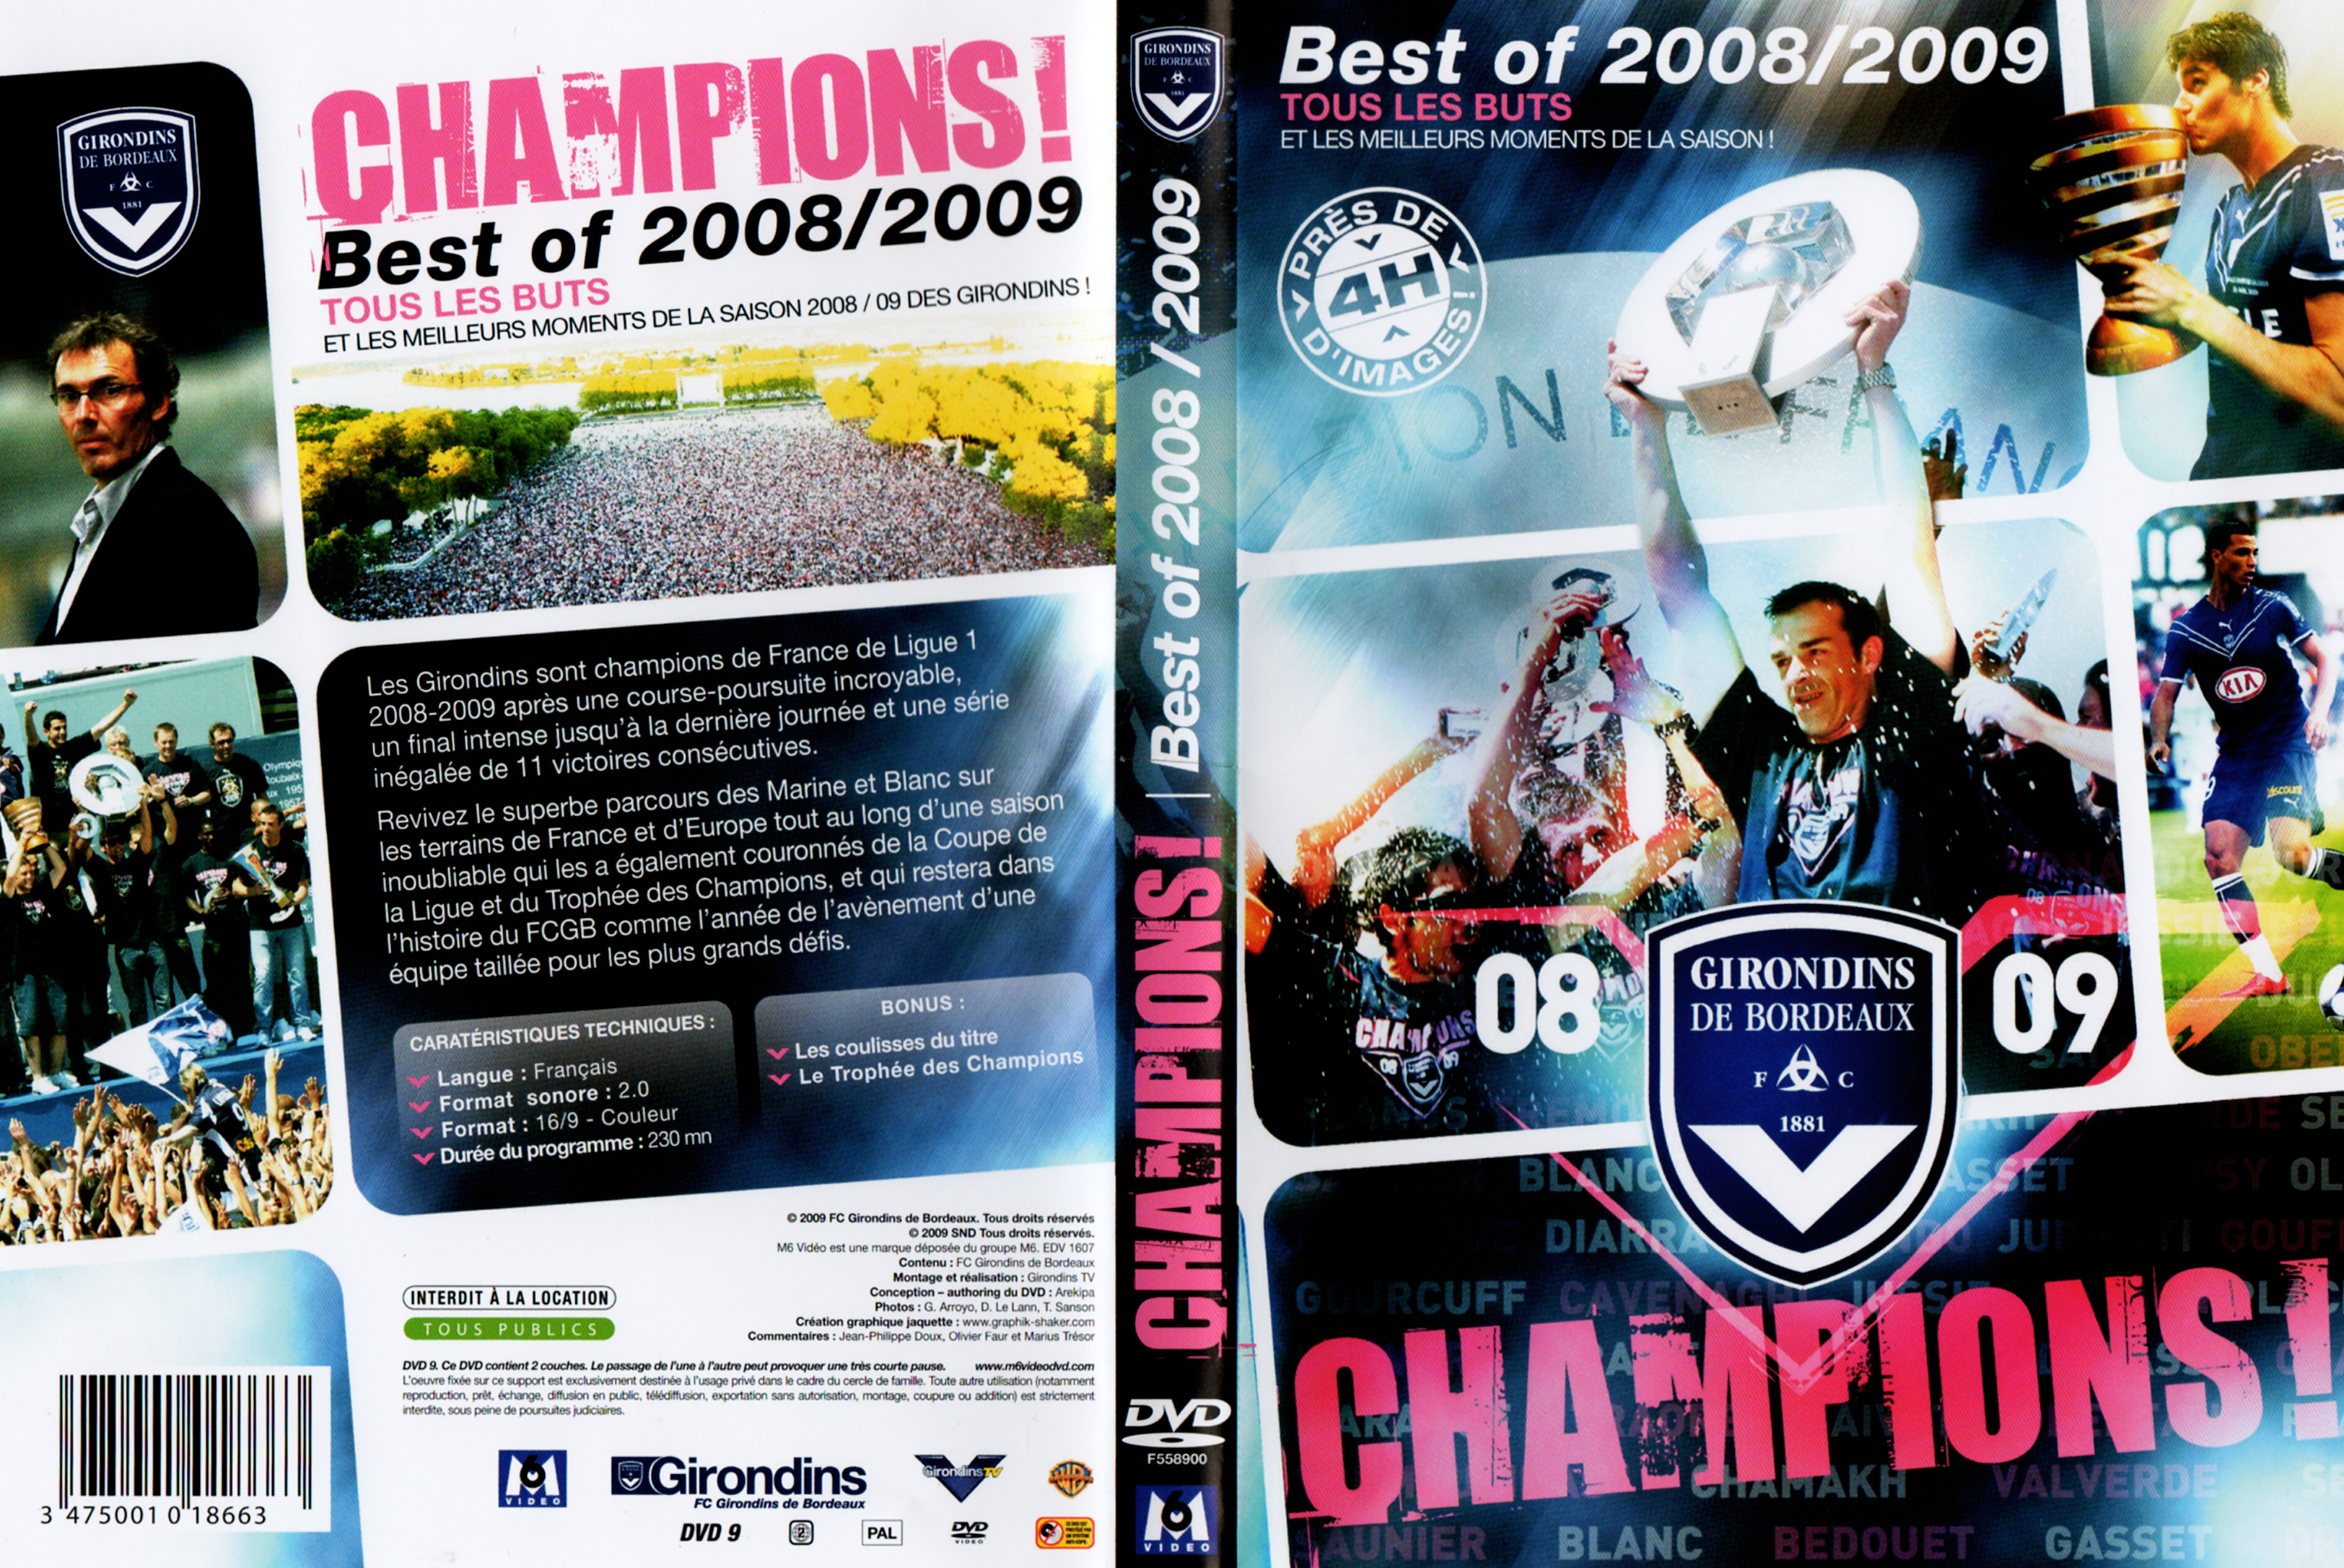 Jaquette DVD Champions Best of 2008-2009